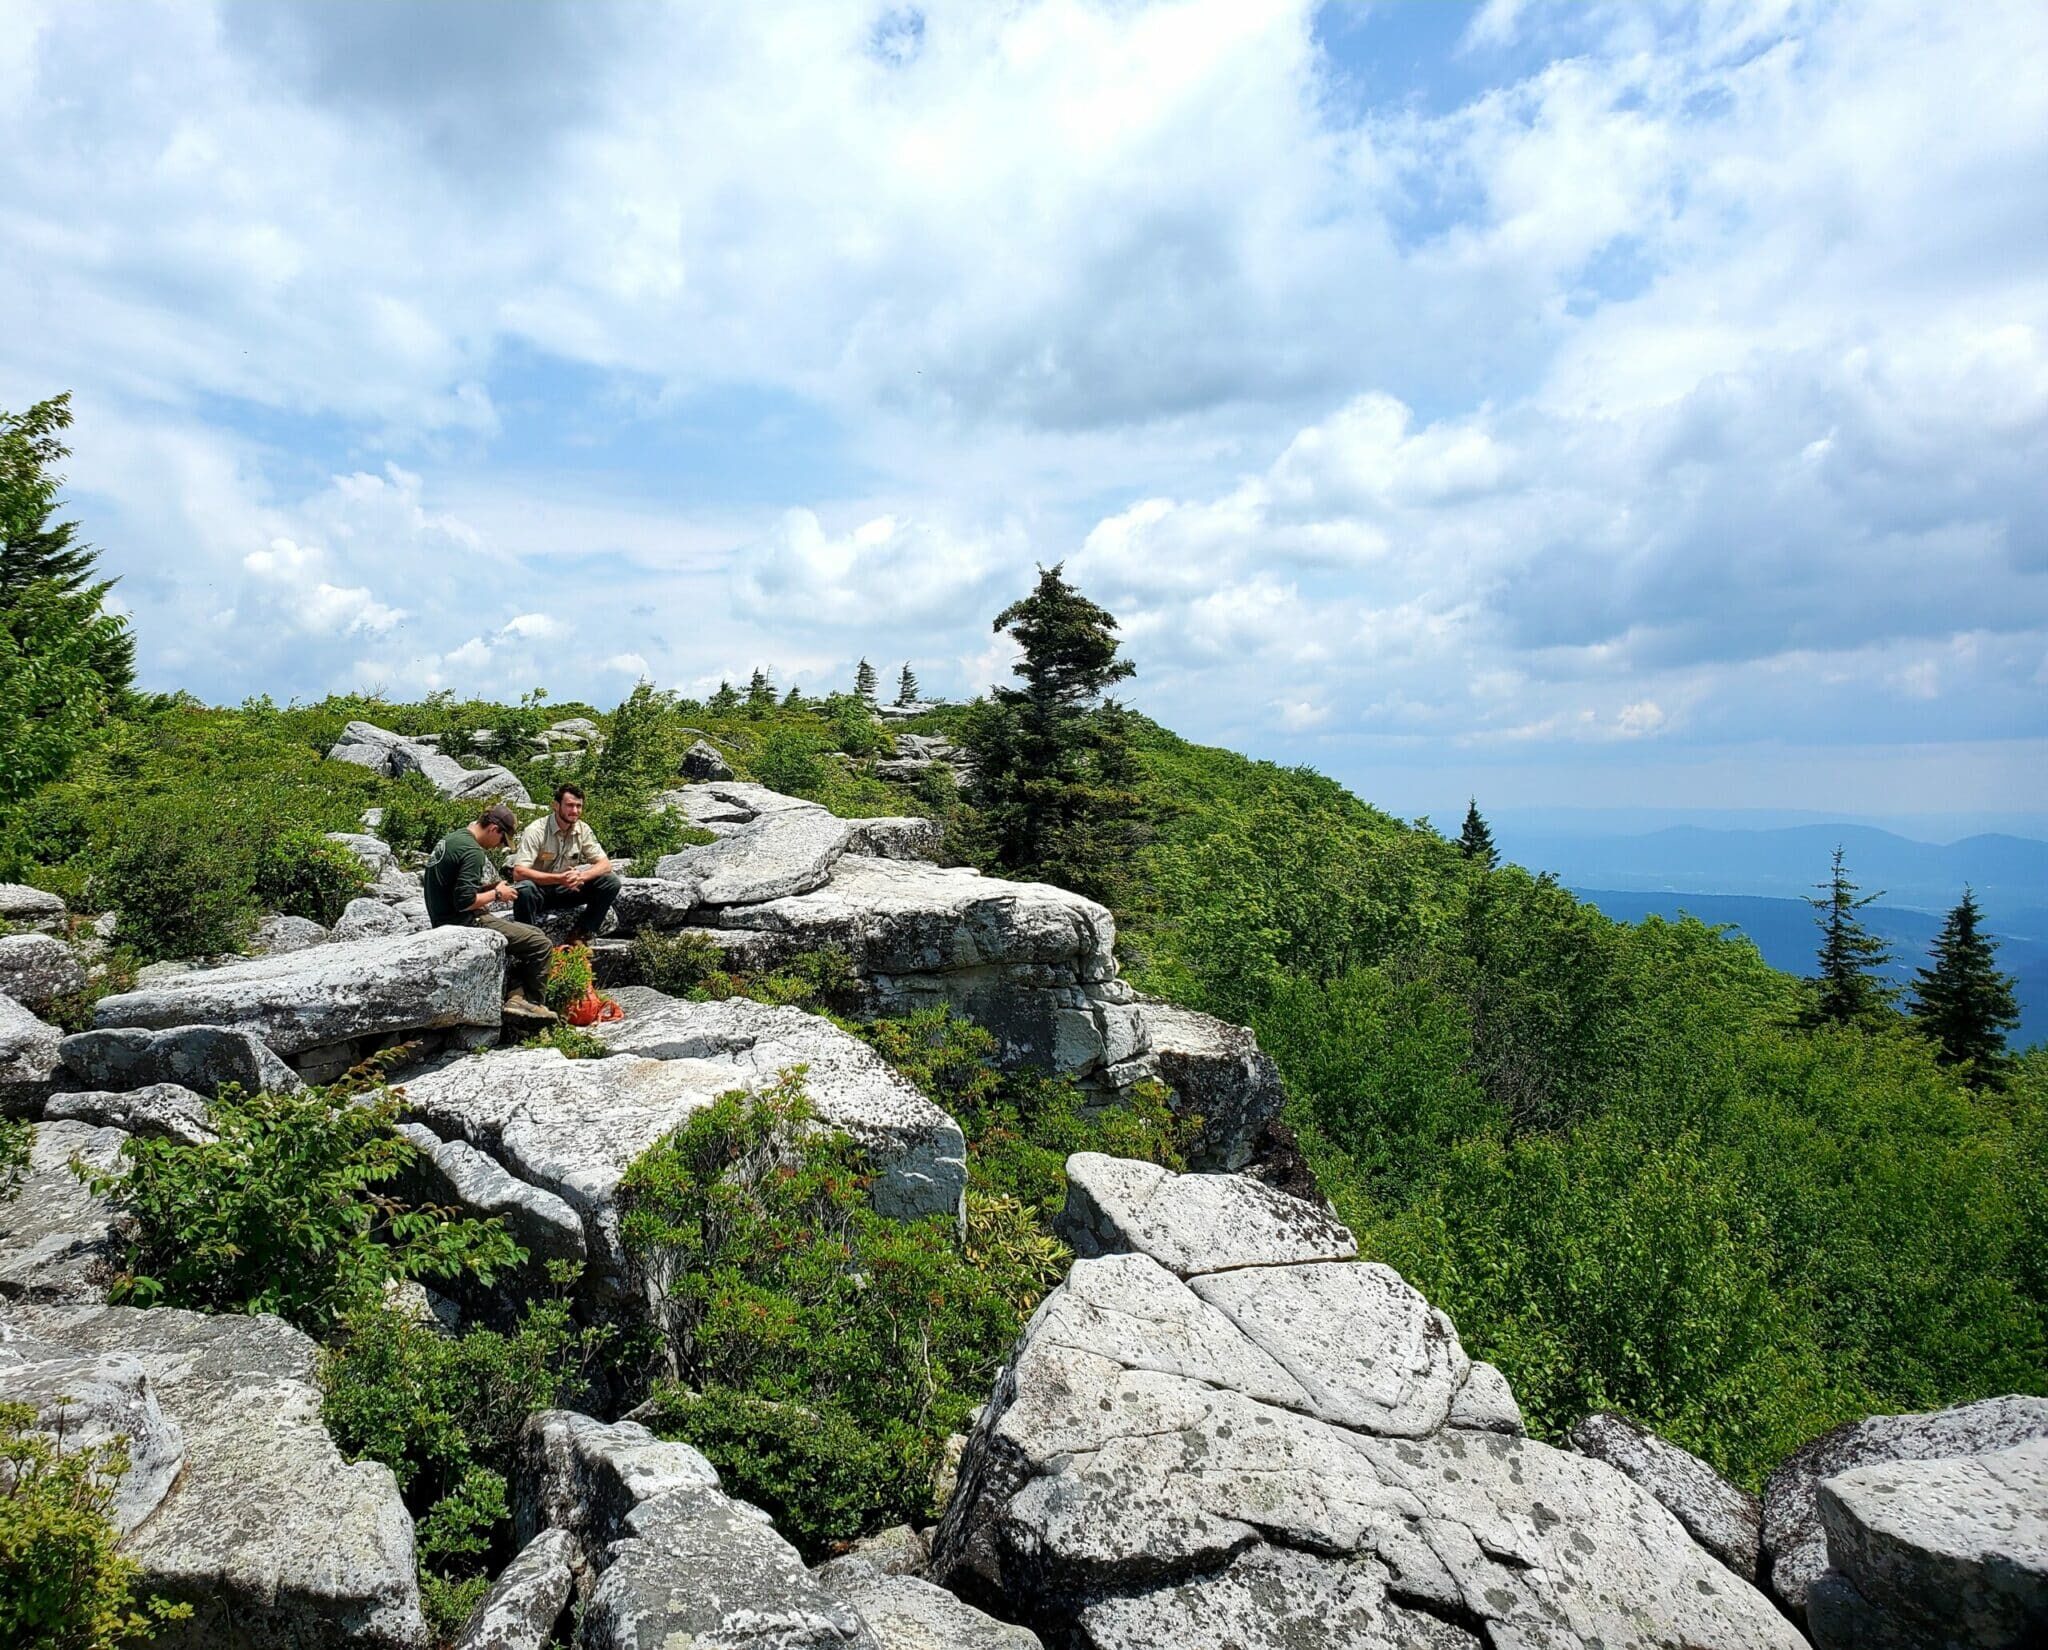 The Dolly Sods Wilderness.